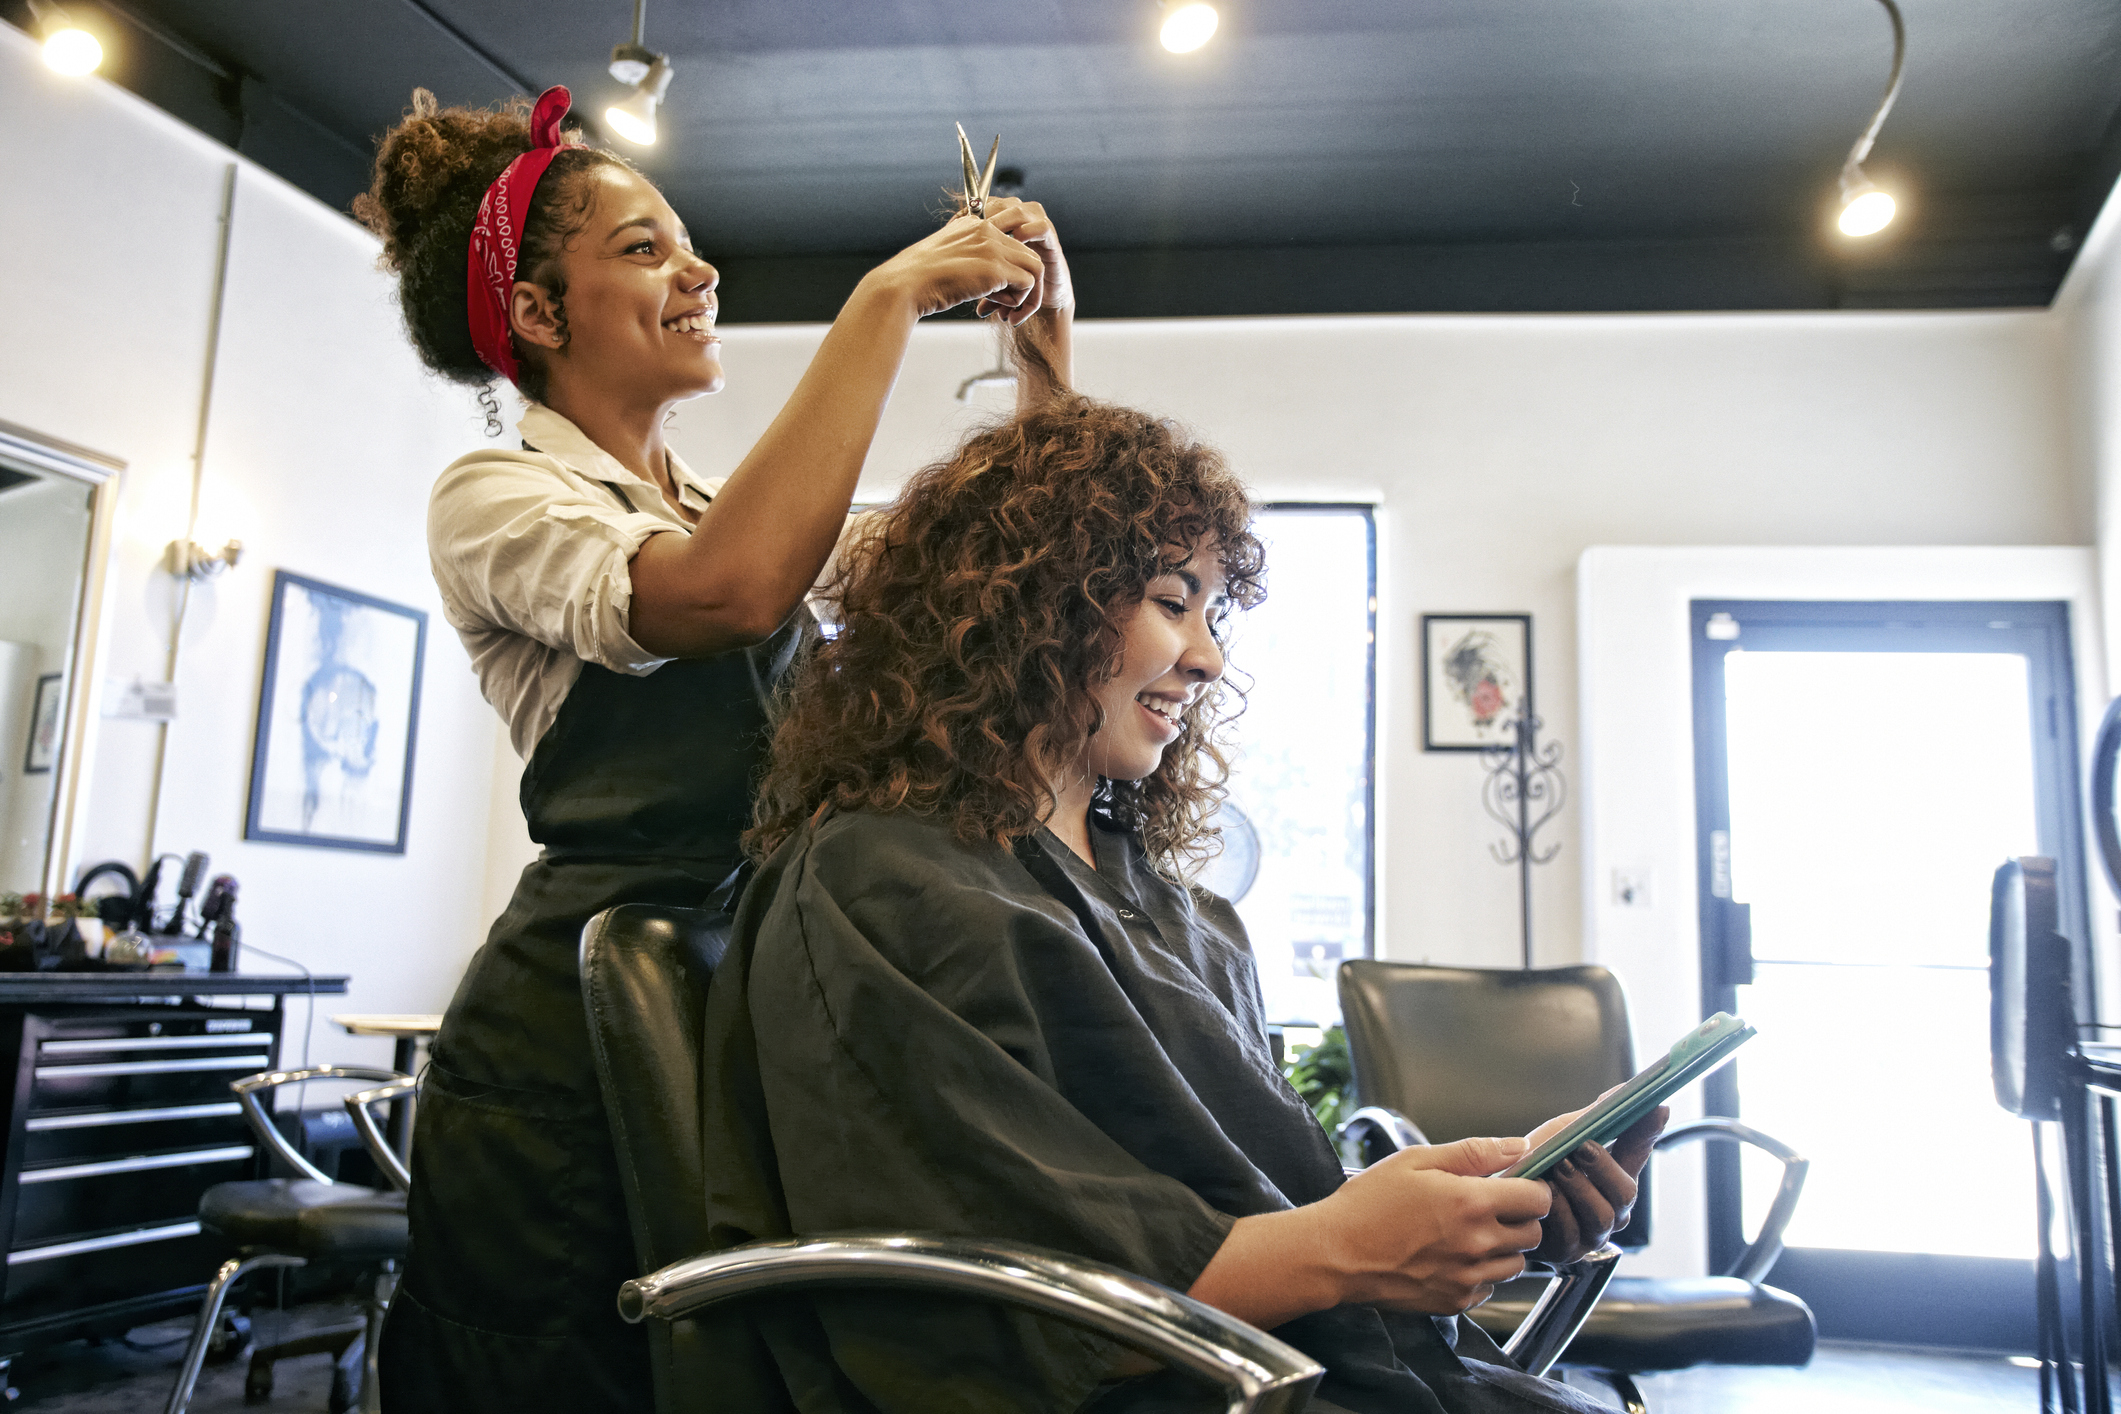 A woman is getting her hair done at the salon